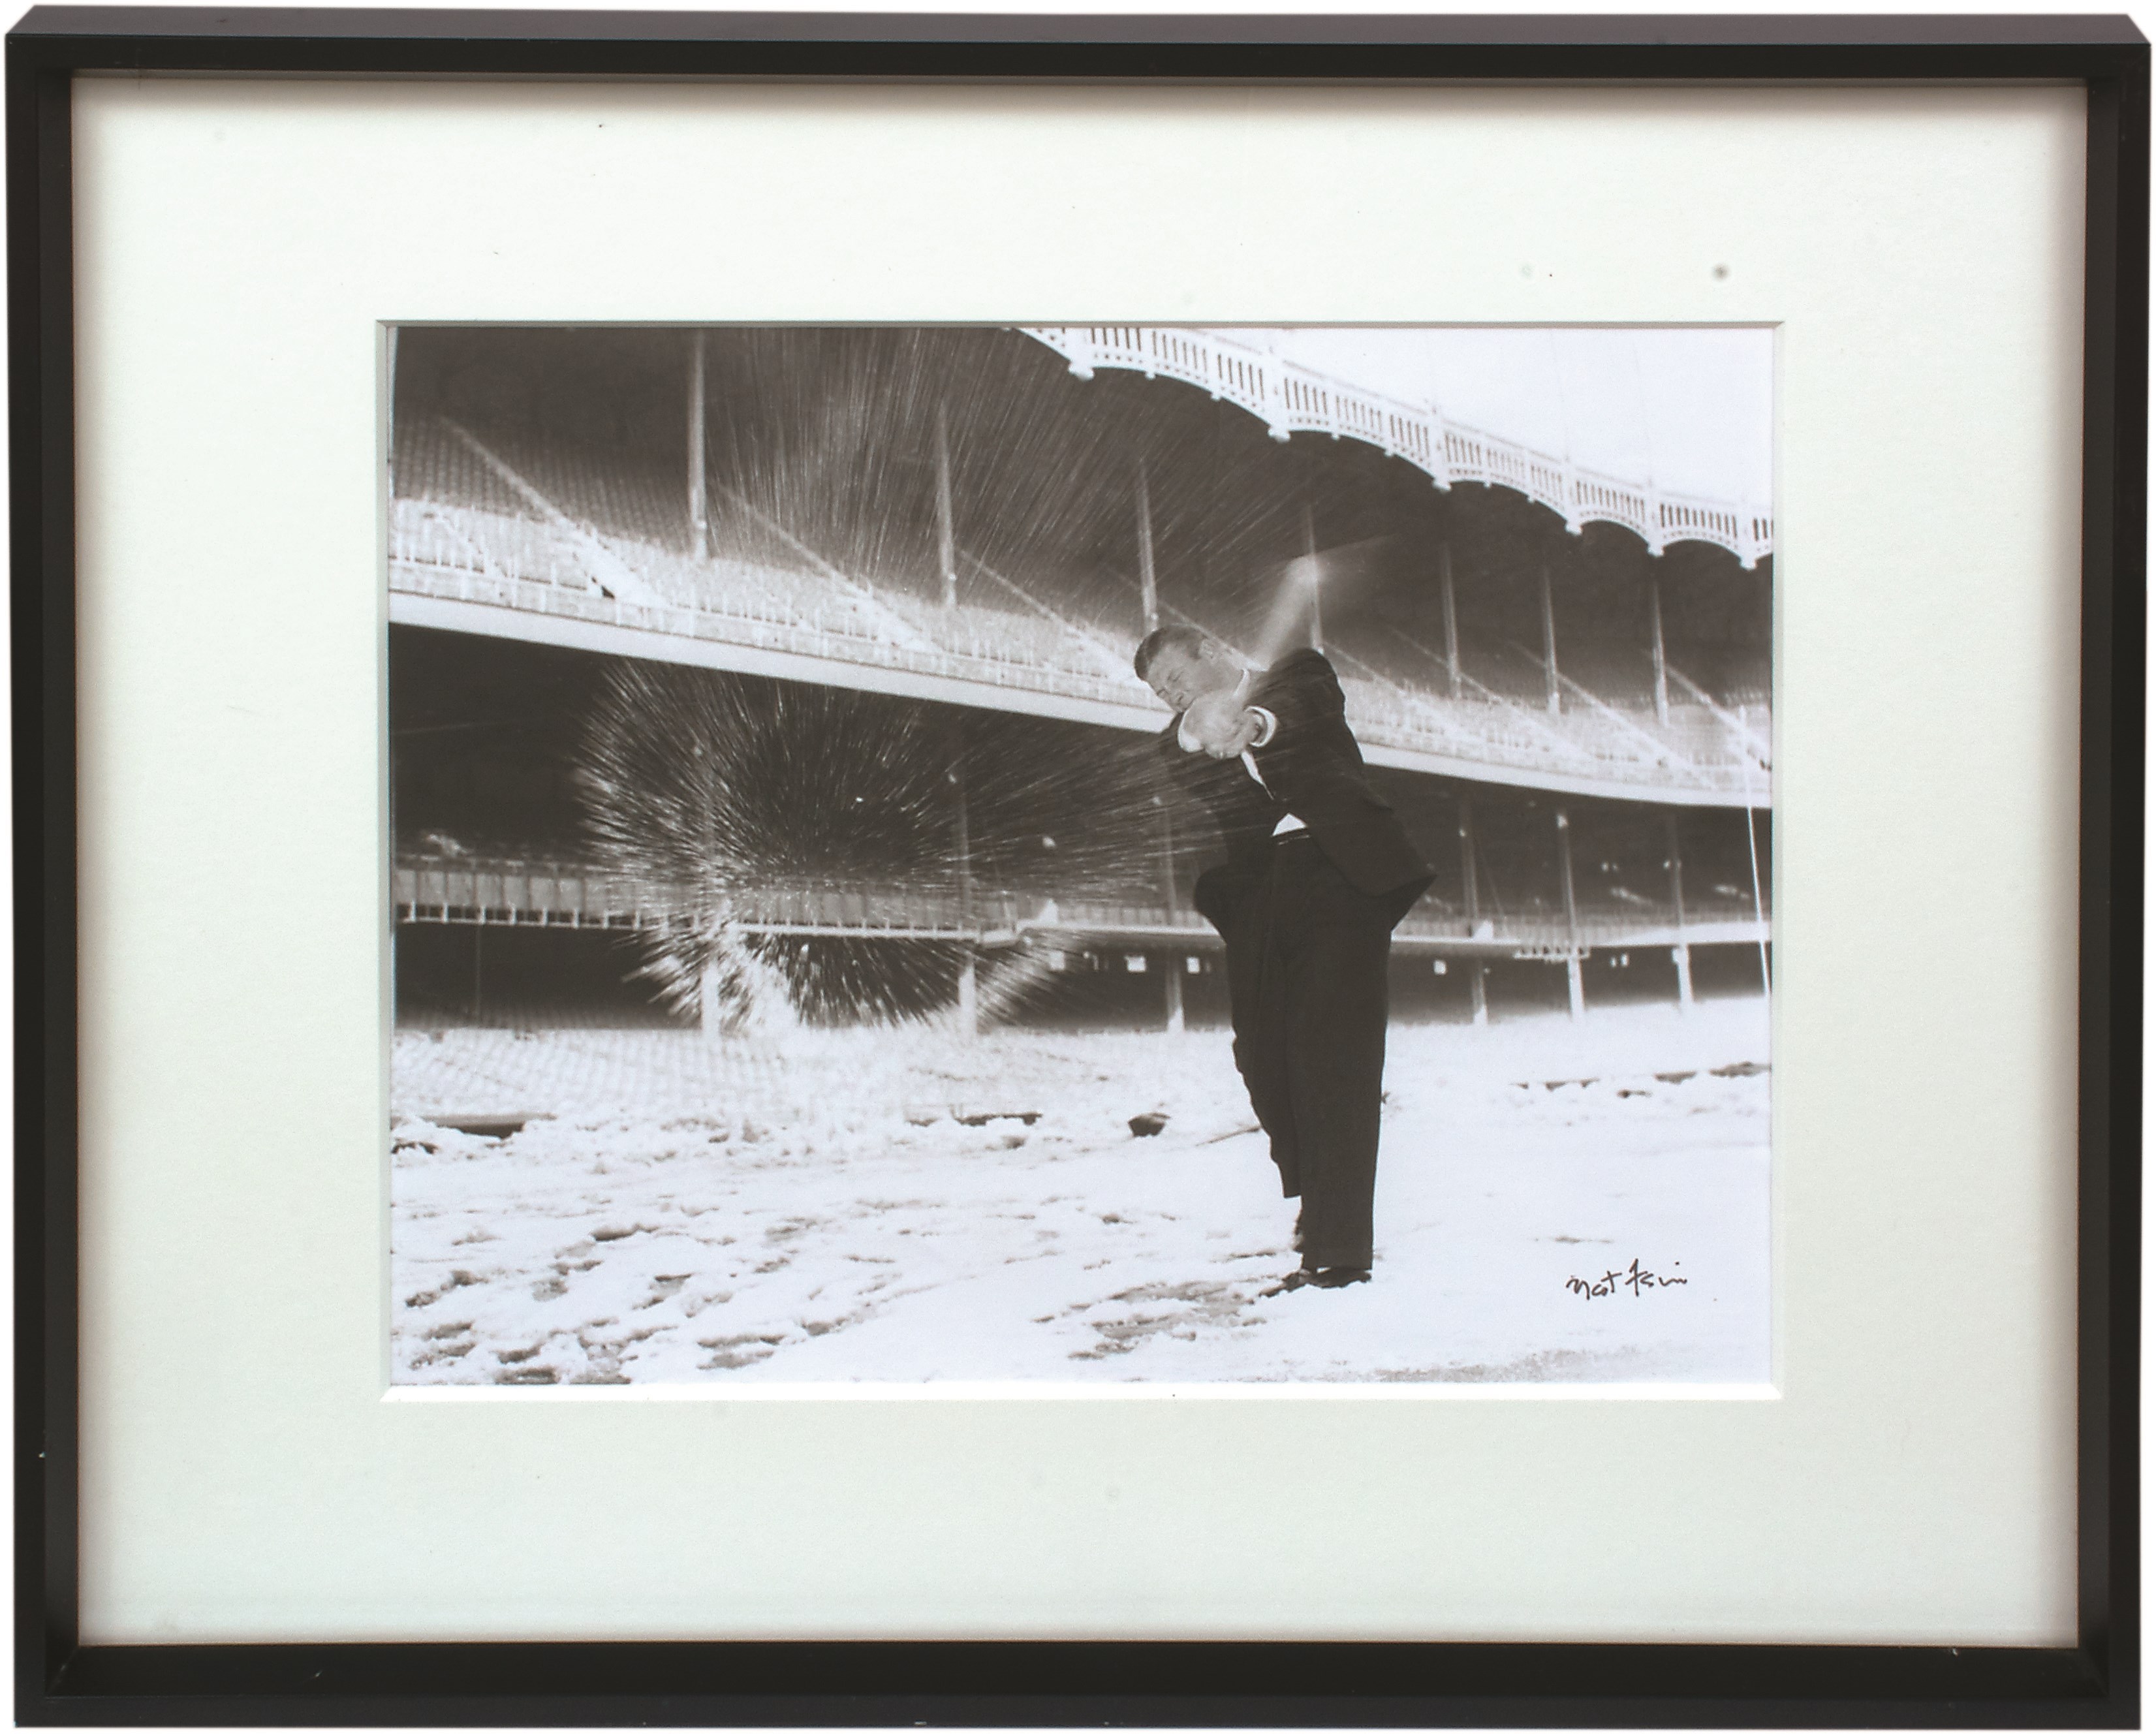 1957 Mickey Mantle Belting Snow Balls in Yankee Stadium Signed by Nat Fein - from Original Negative